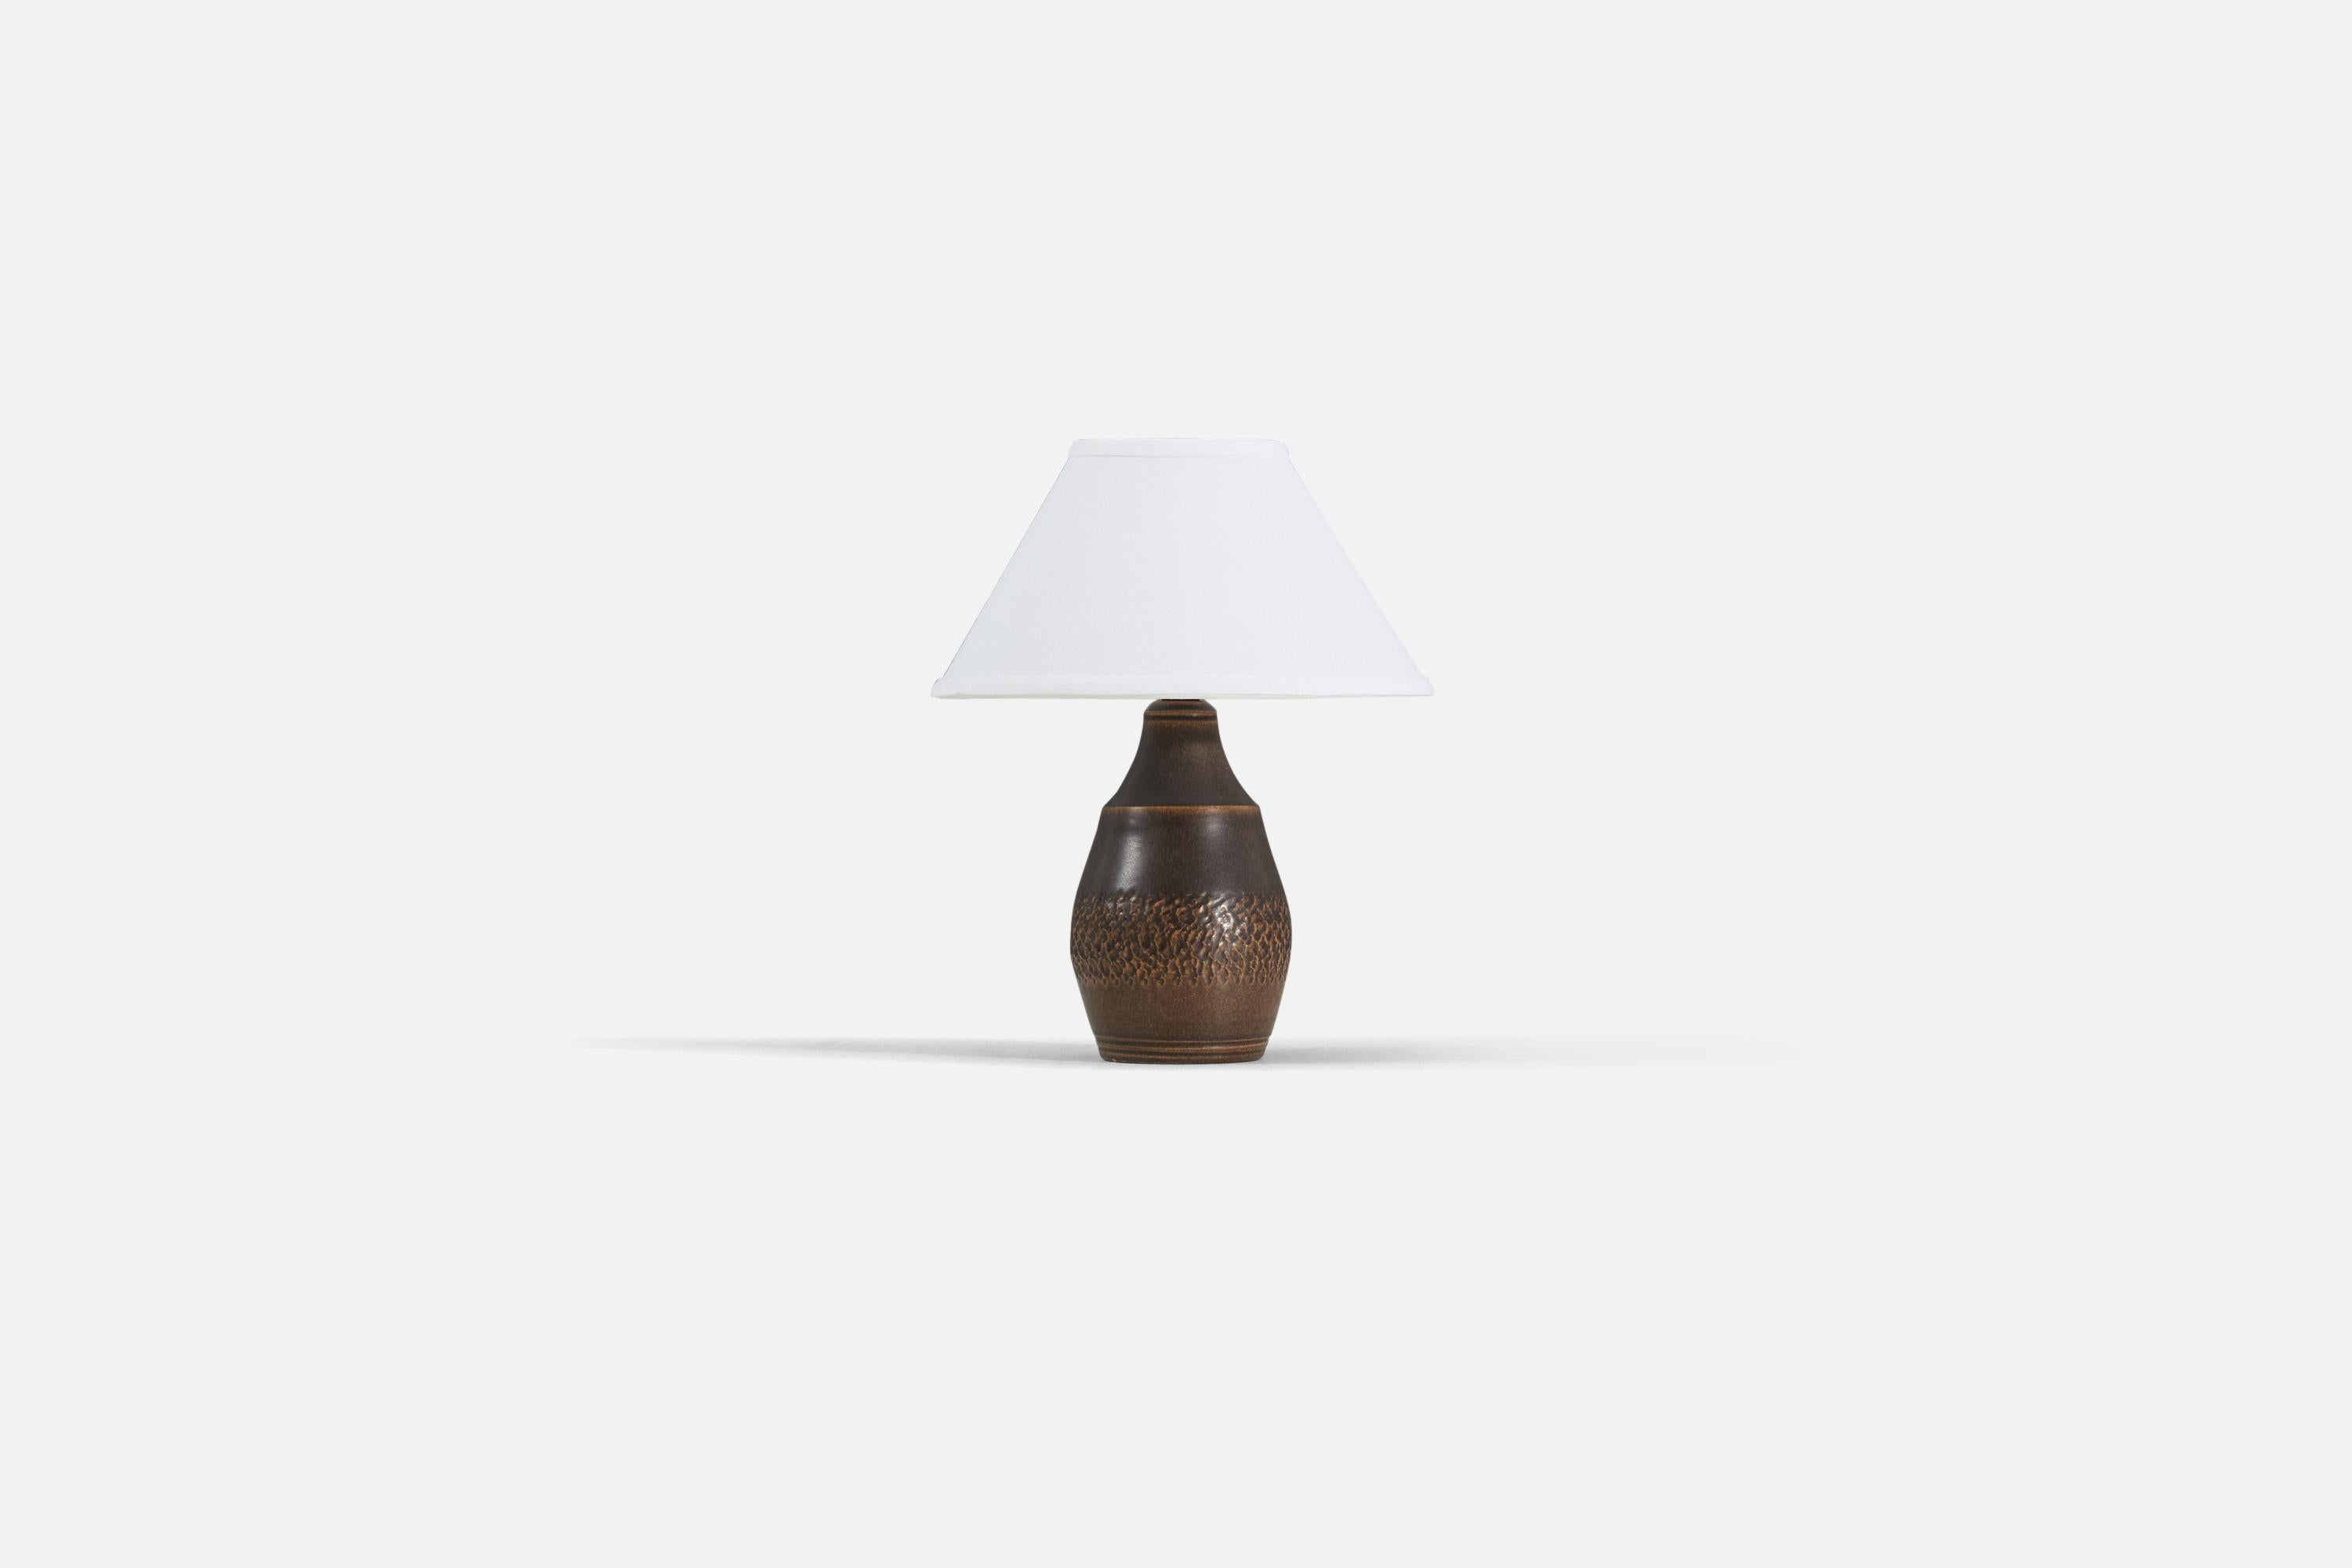 A brown-glazed stoneware table lamp designed by Henry Brandi, and produced by his own firm, Brandi Vejbystrand, Sweden, 1960s. Marked and labeled. 

Sold without lampshade.

Measurements listed are of lamp.
Shade : 4.5 x 10.25 x 6
Lamp with